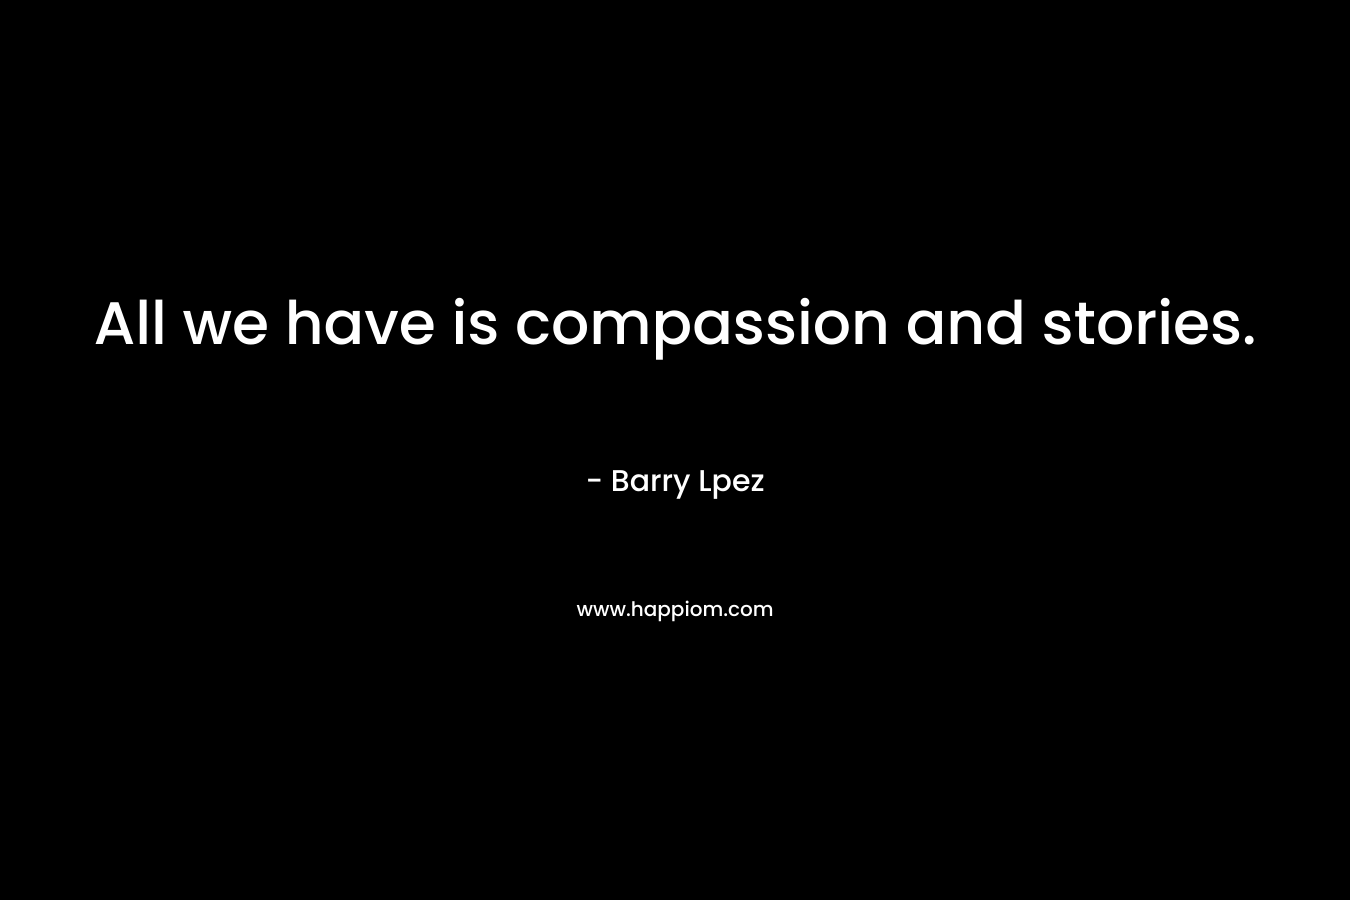 All we have is compassion and stories. – Barry Lpez